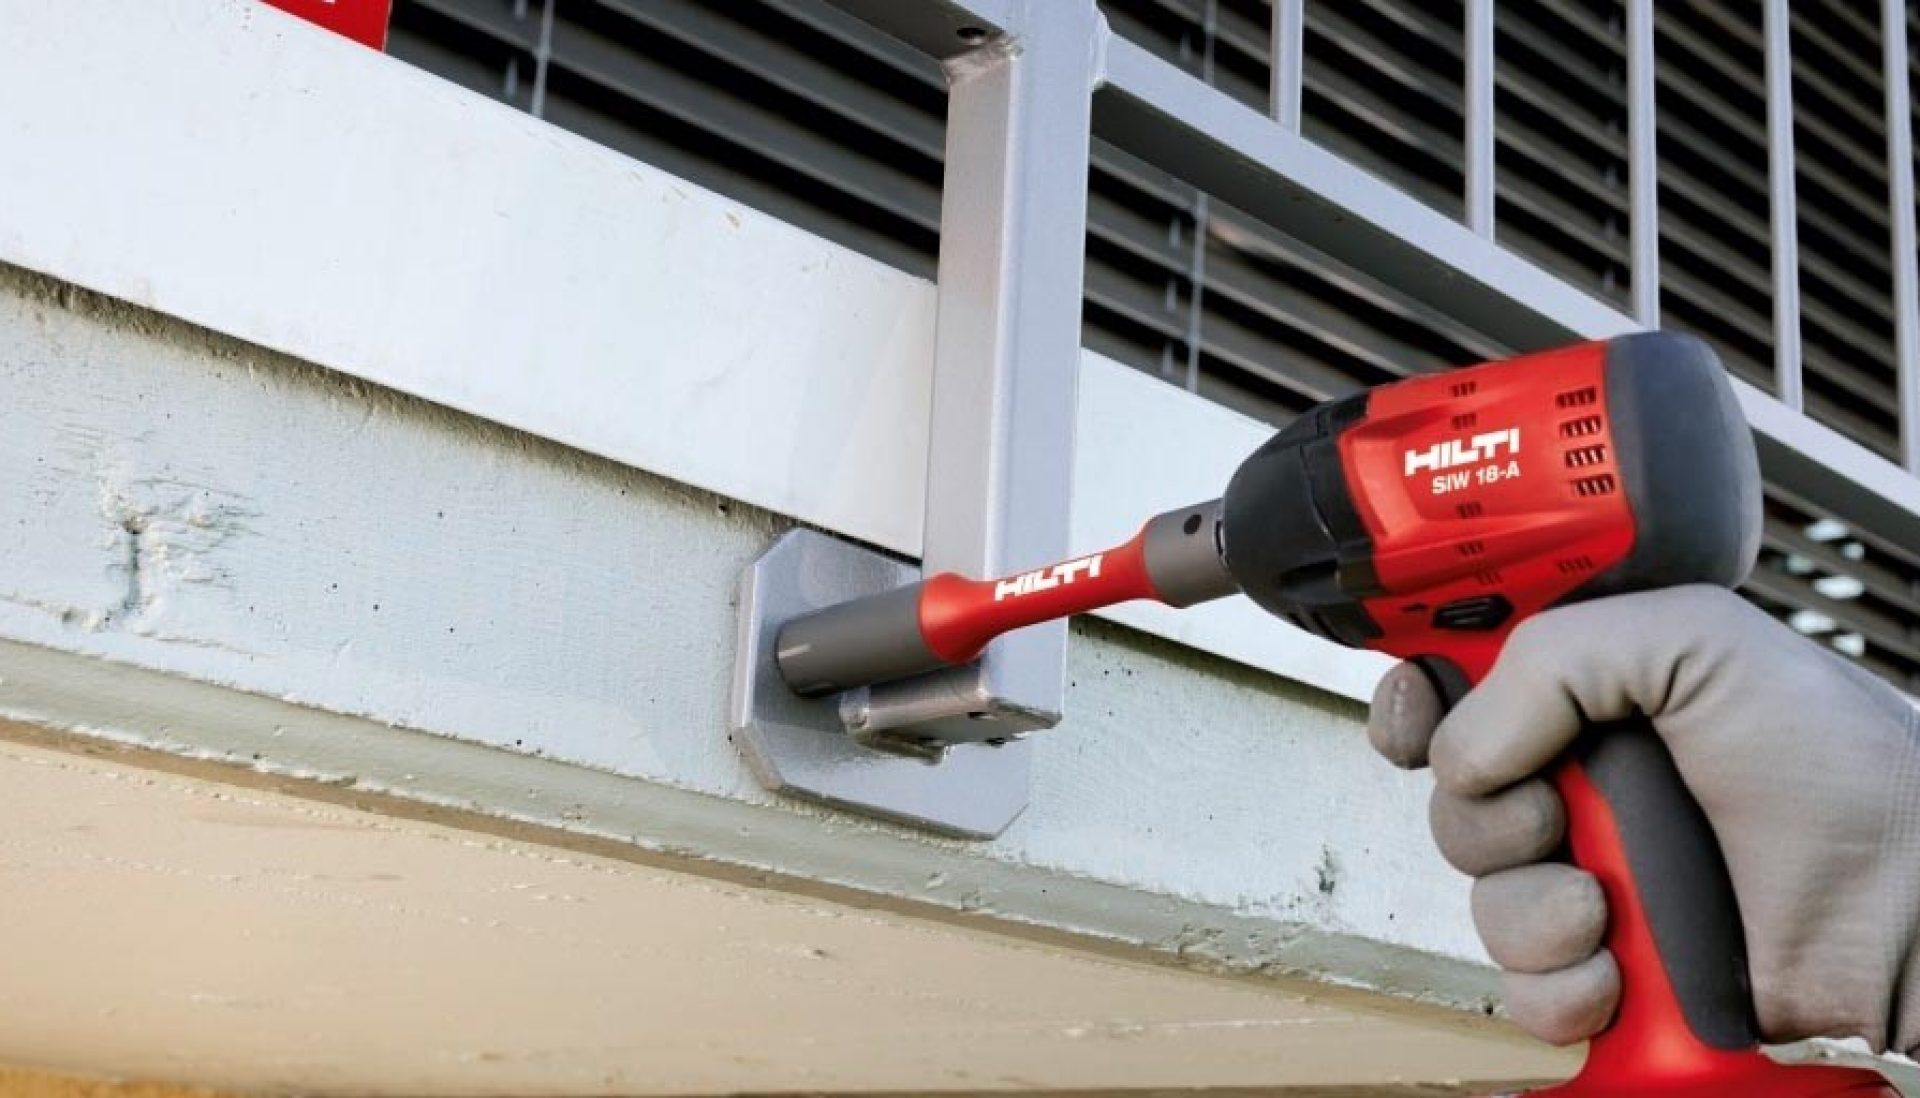 installation of handrail with Hilti impact wrench